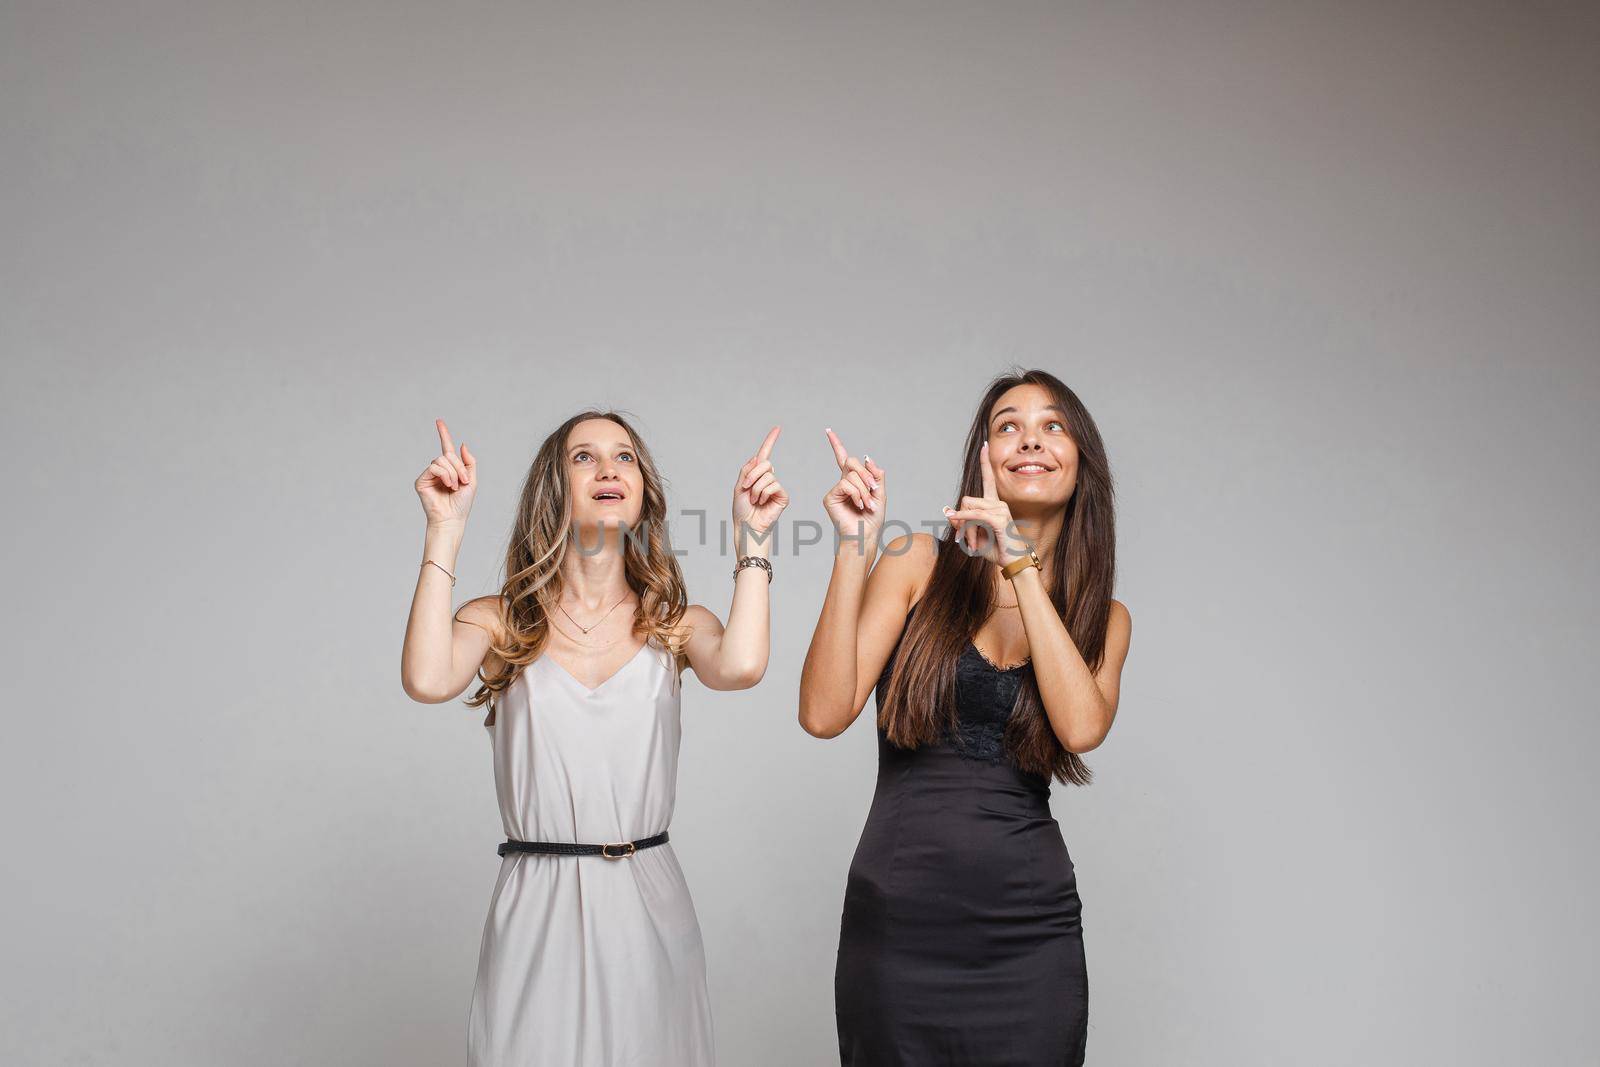 Two pretty women standing in studio pointing their fingers up, isolated on grey background. Party concept. Copy space